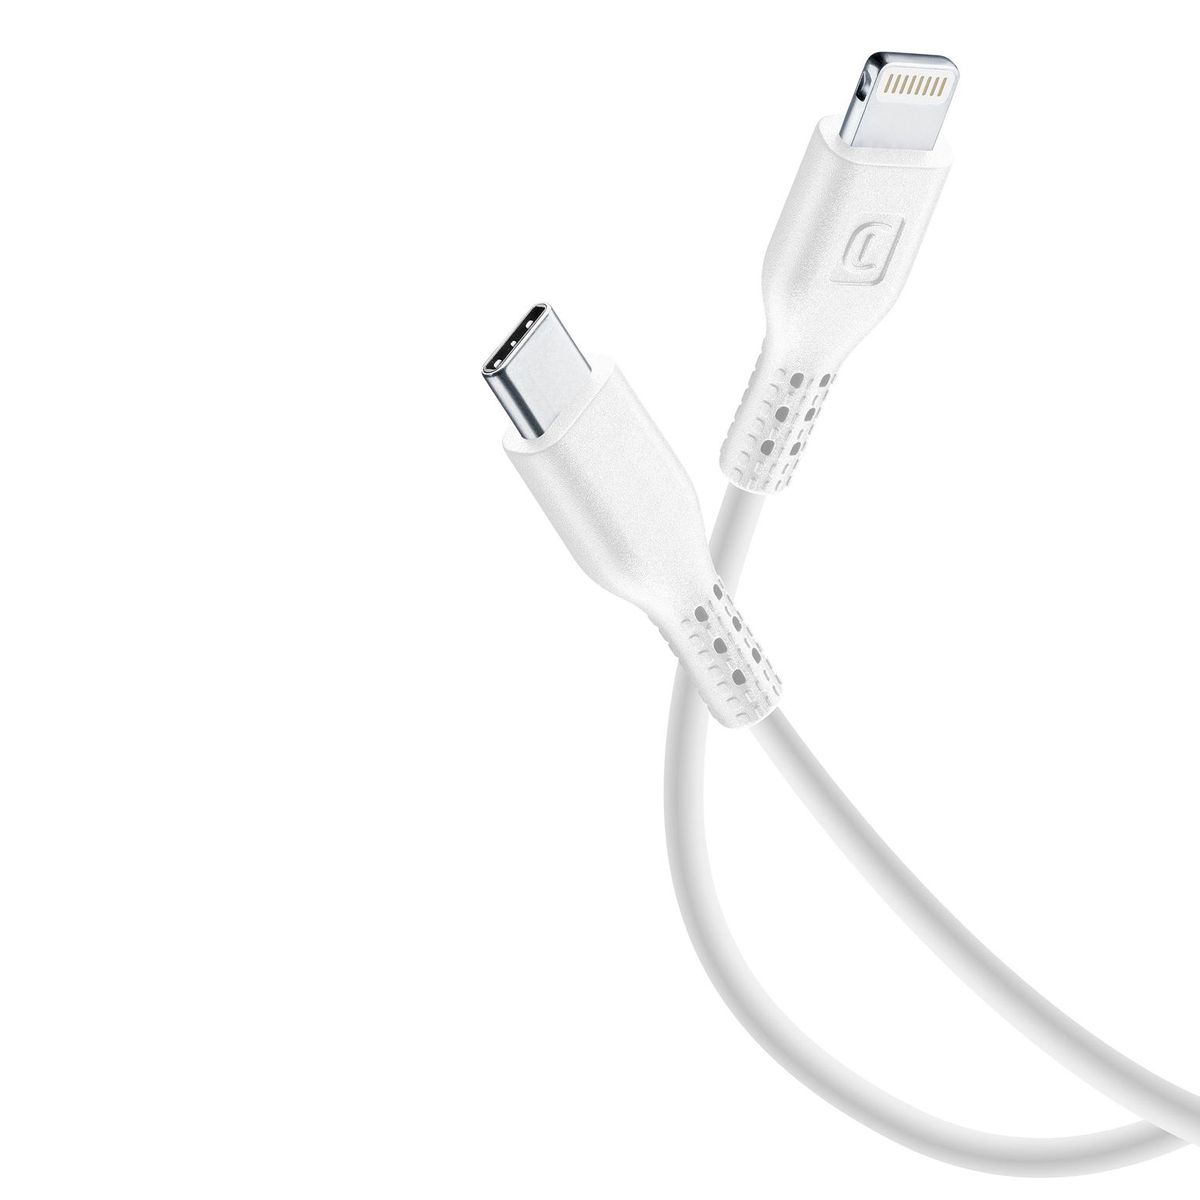 Cellularline USB-C to Lightning Cable, 1.2 Meter - White